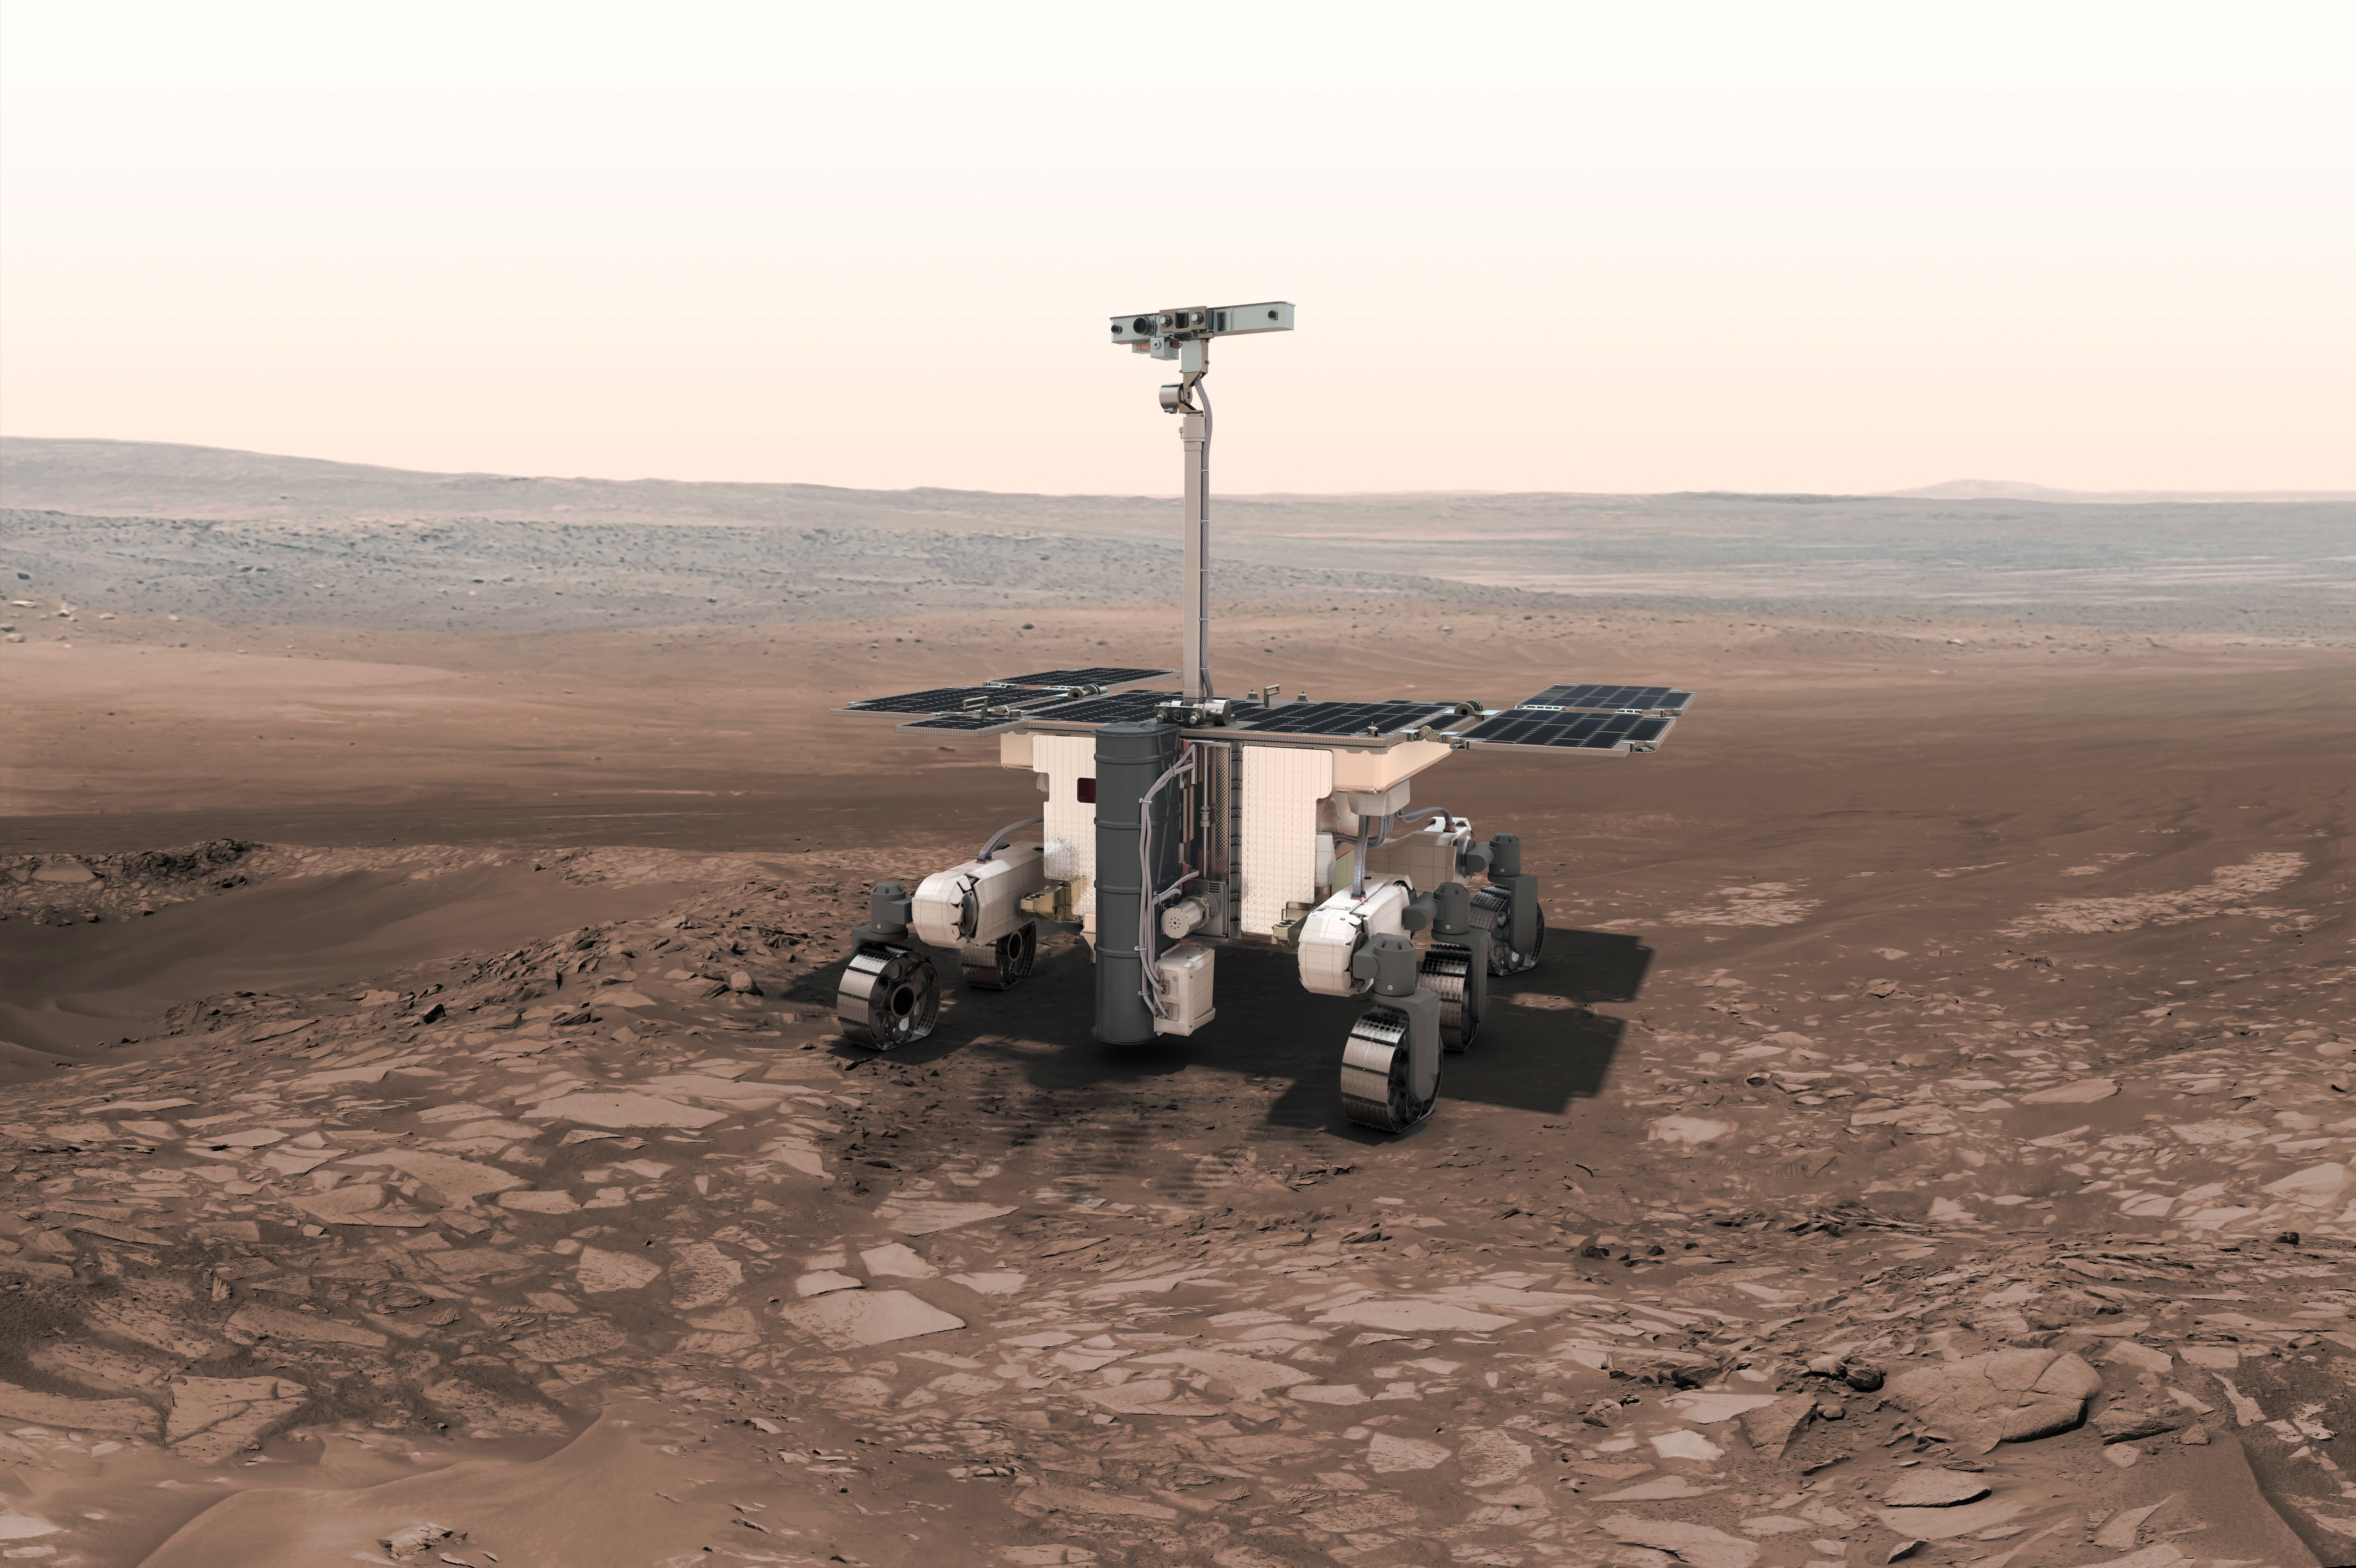 A theoretical instrument that would search for individual microbes on the surface of Mars. Image credit: ESA